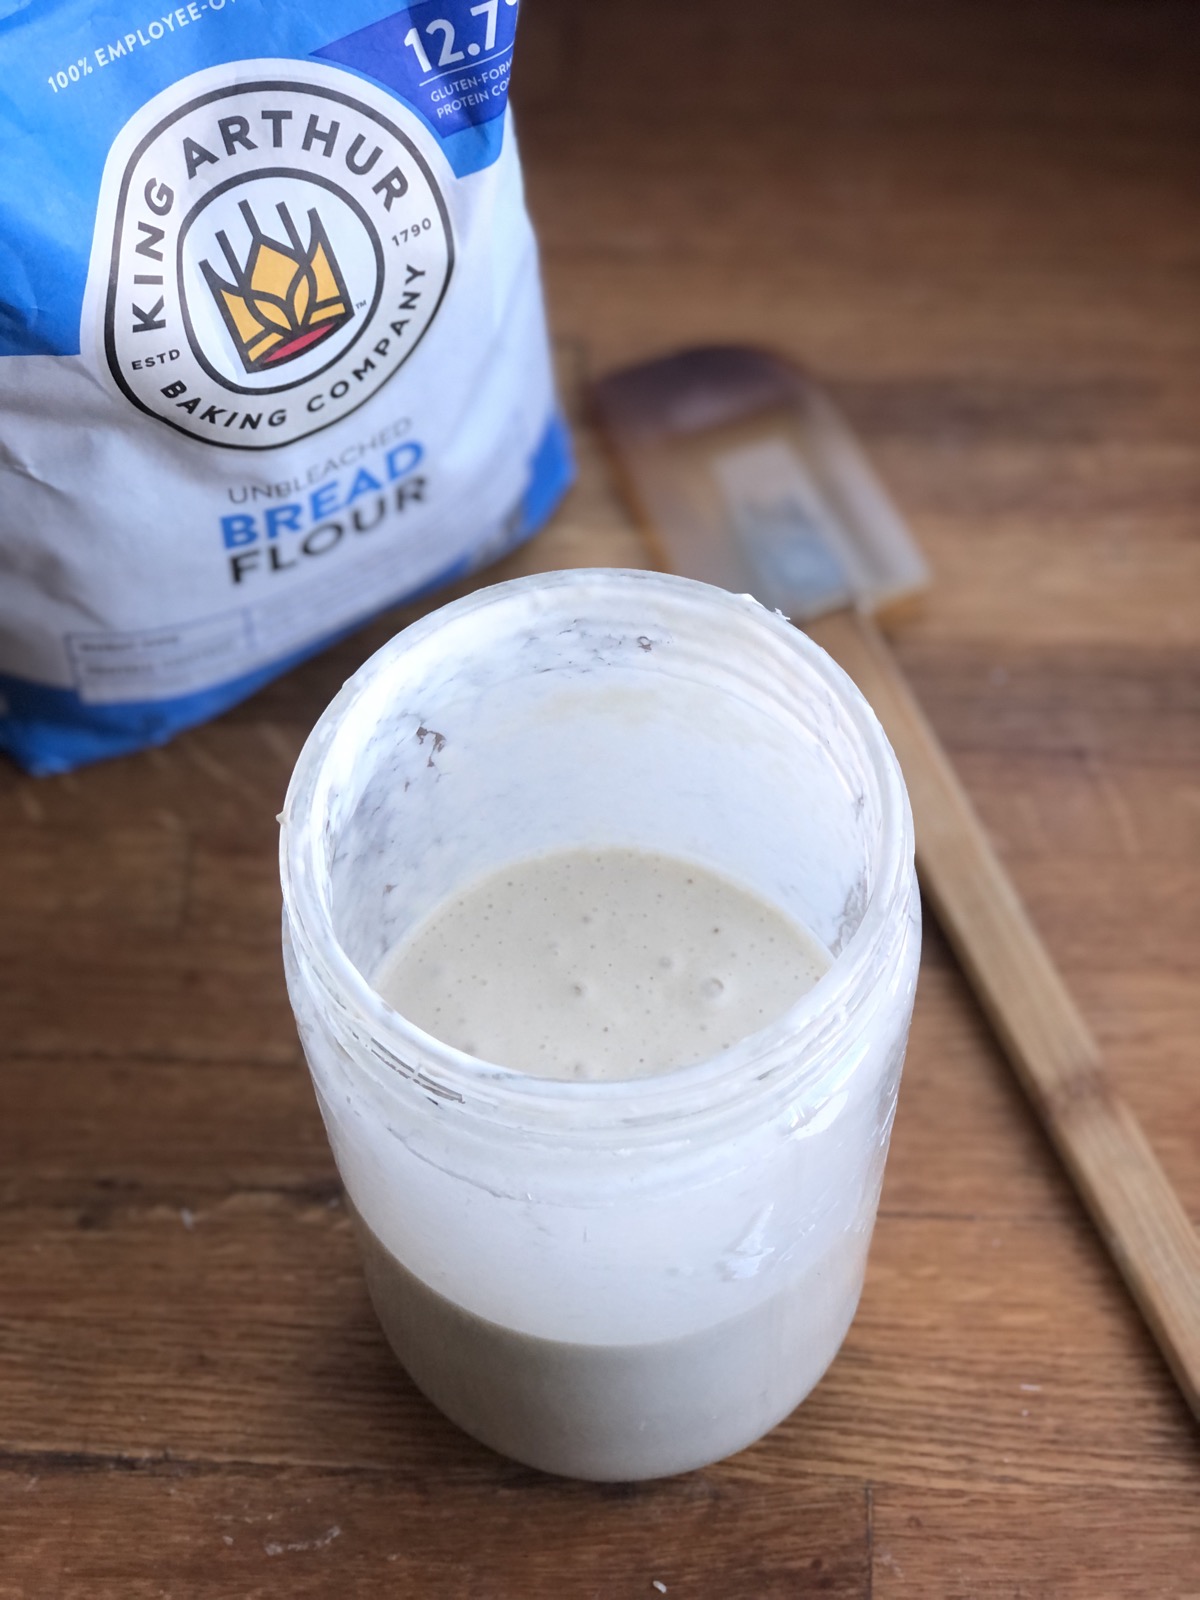 Sourdough starter in a jar, bag of bread flour and spatula in the background.